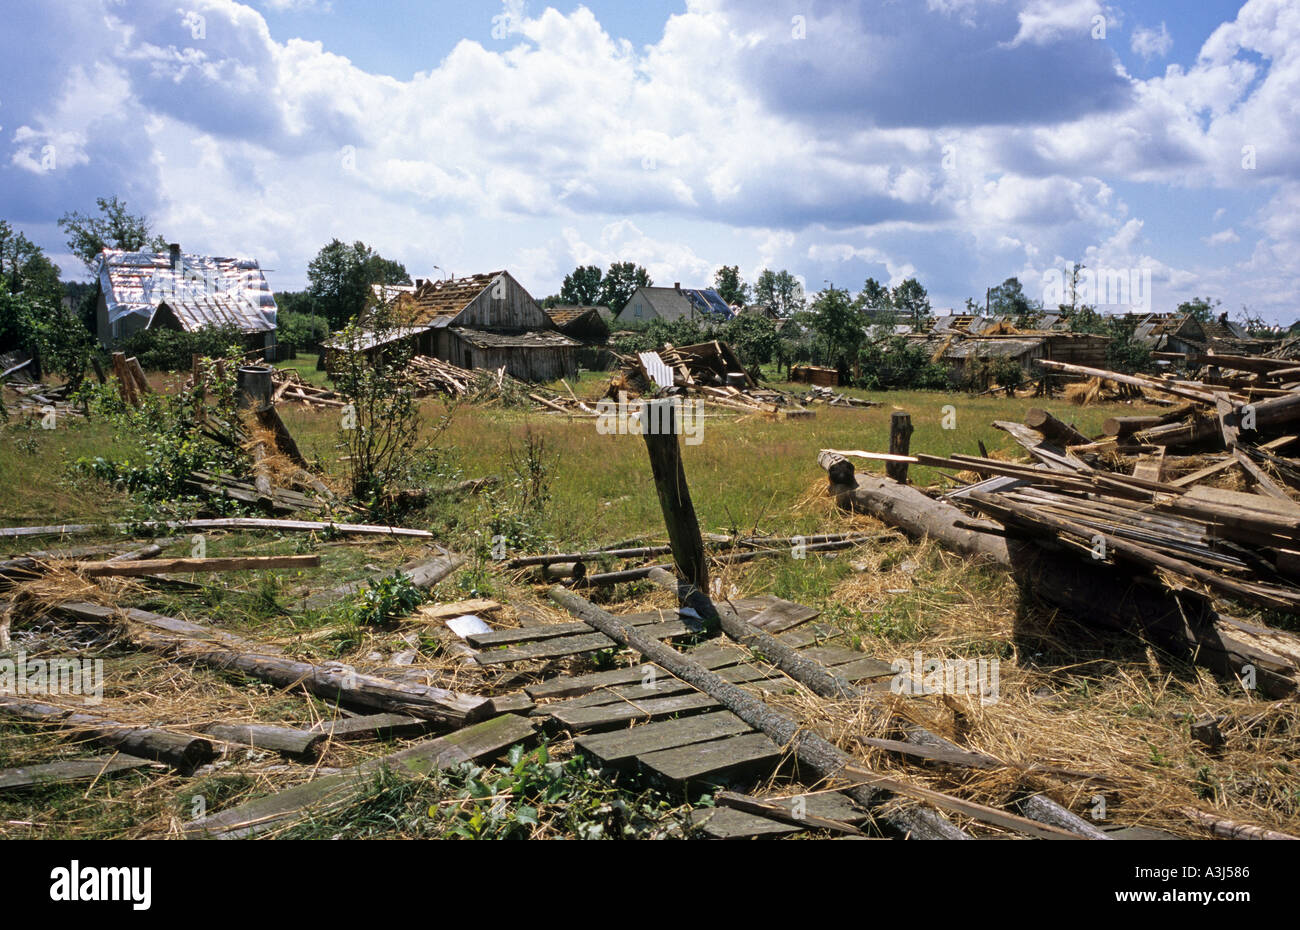 Poland Europe Jelonka village flattened by violent wind in July 2004 Stock Photo